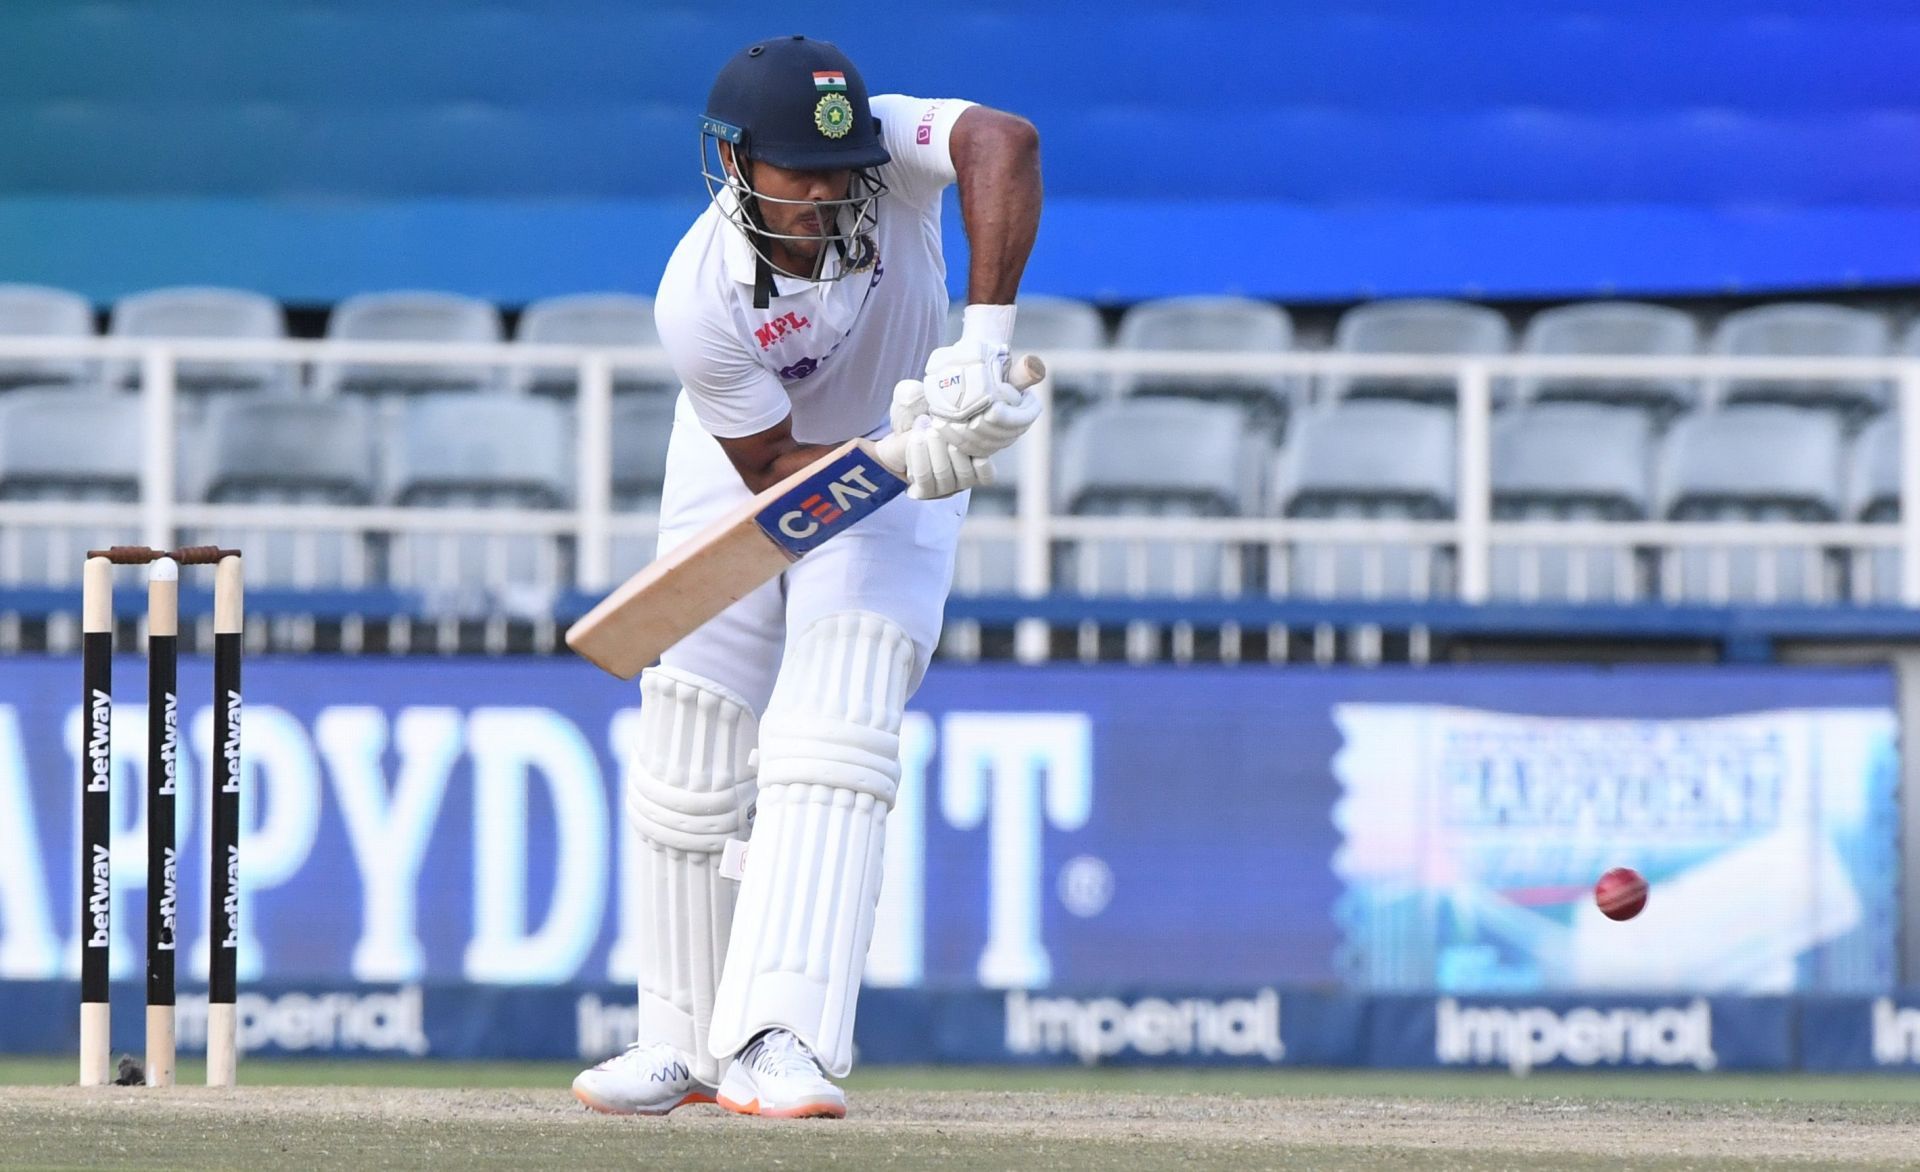 Mayank Agarwal has amassed 128 runs at an average of 25.50 in the five innings so far